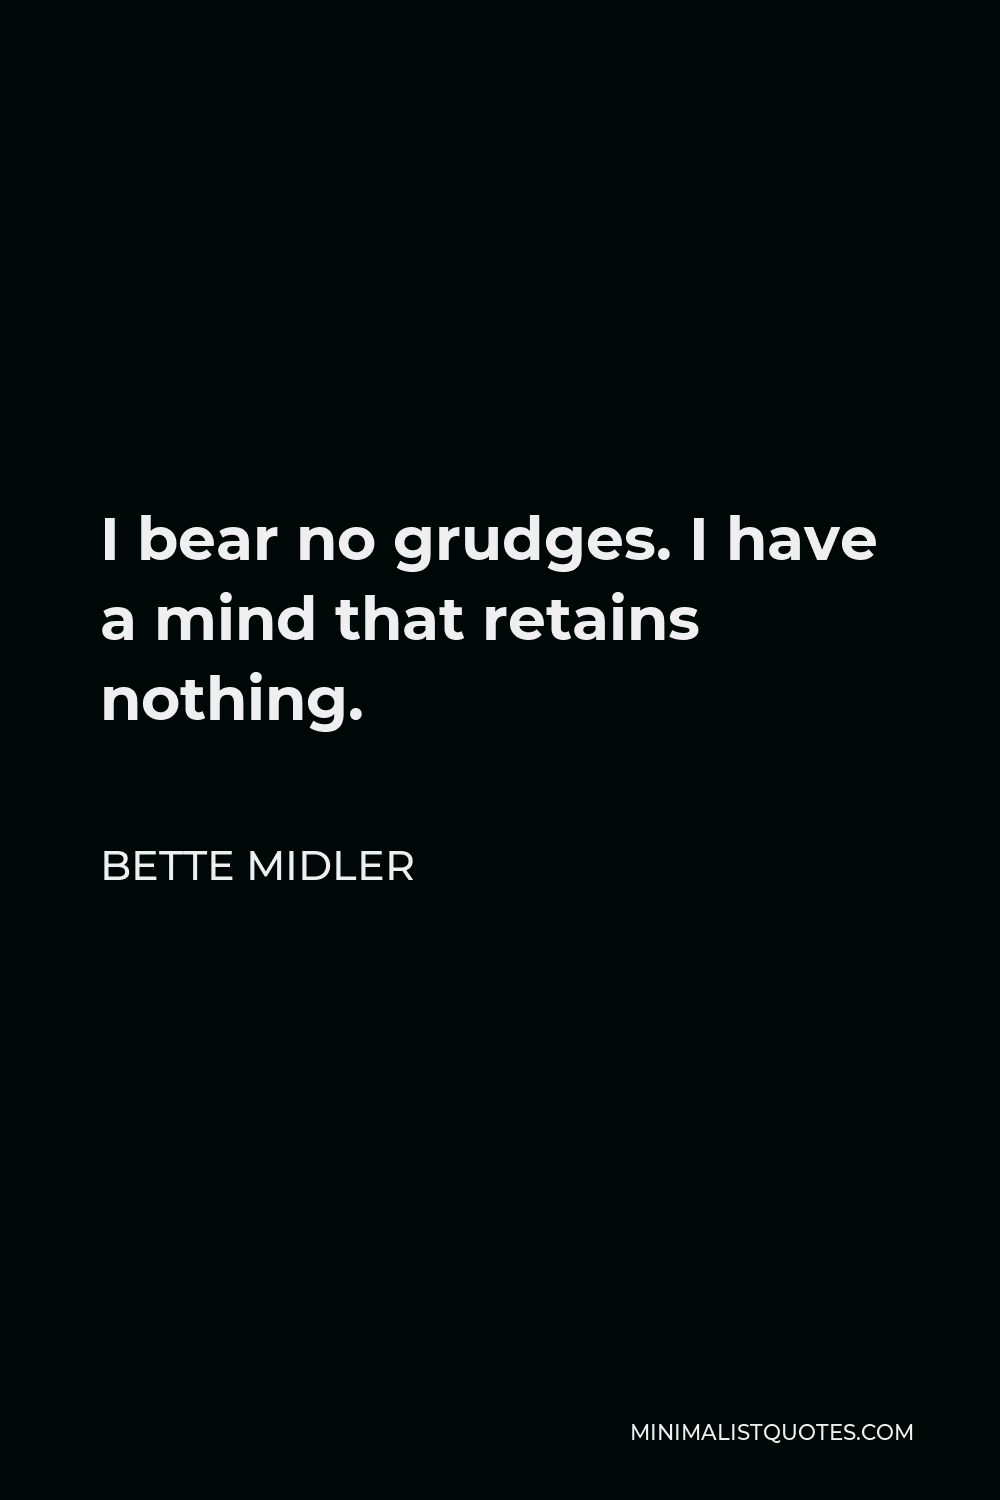 Bette Midler Quote - I bear no grudges. I have a mind that retains nothing.